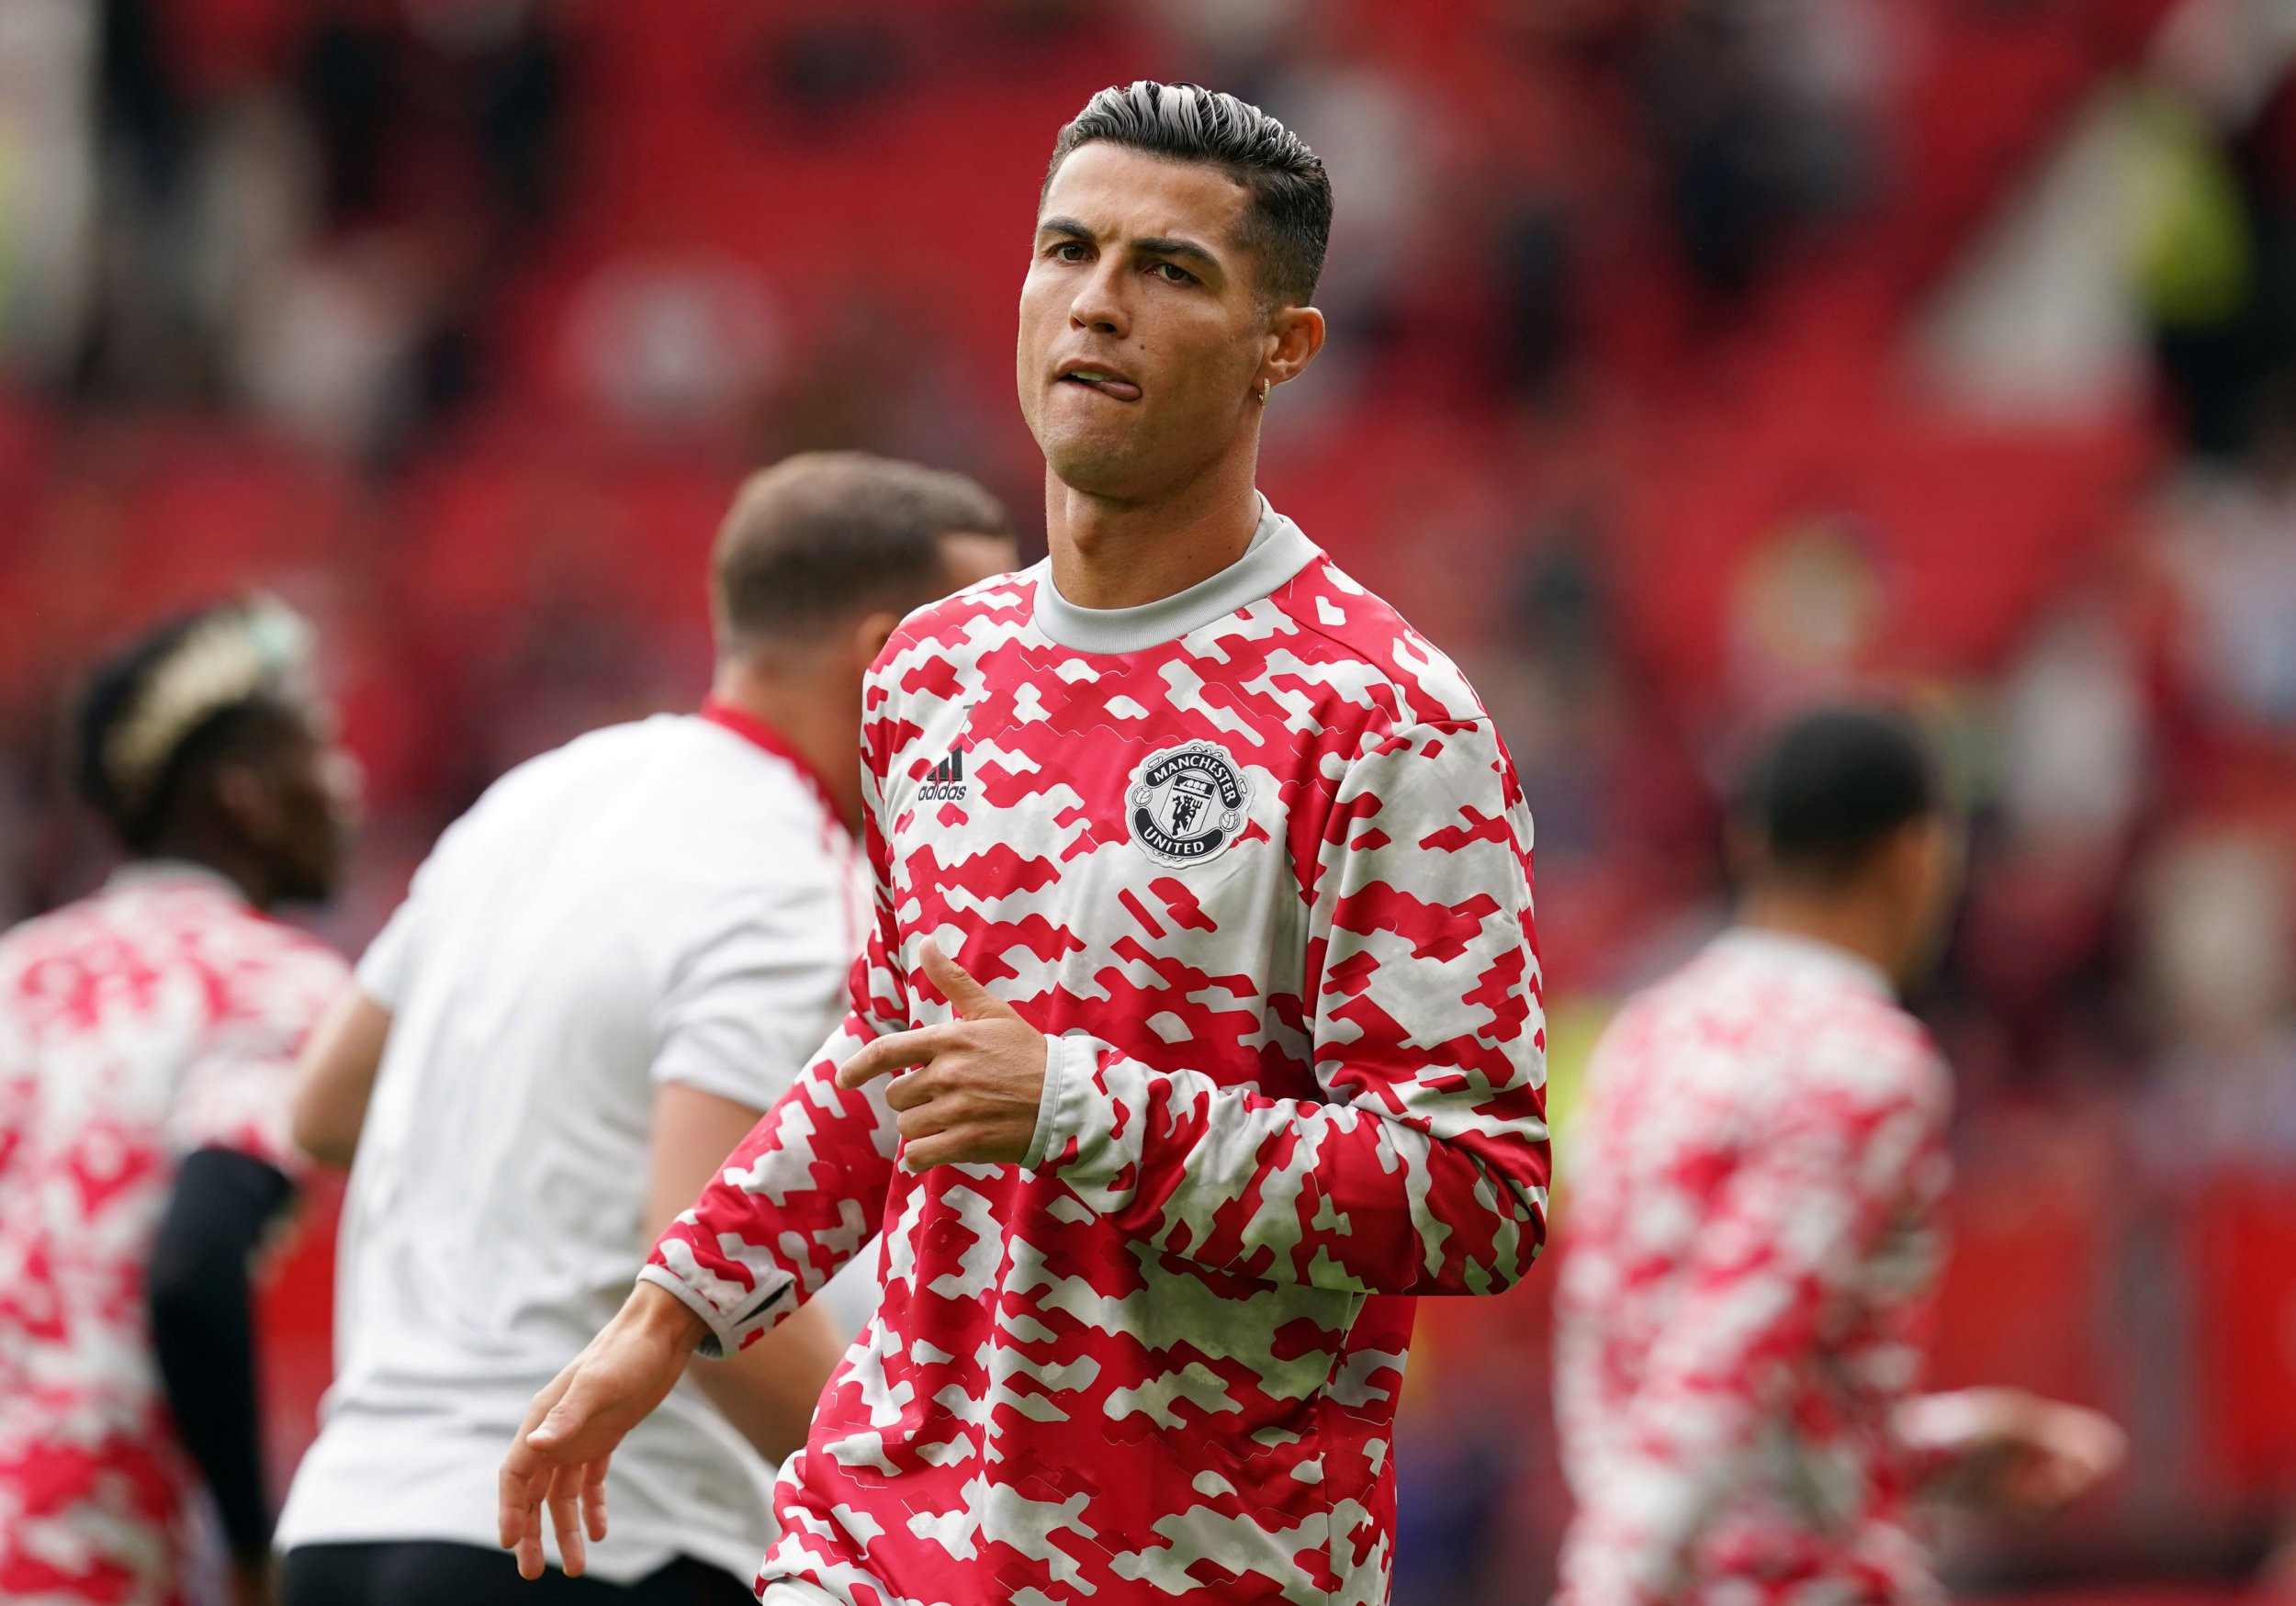 The Cristiano Ronaldo effect: Manchester United squad avoided junk food on eve of Newcastle United win